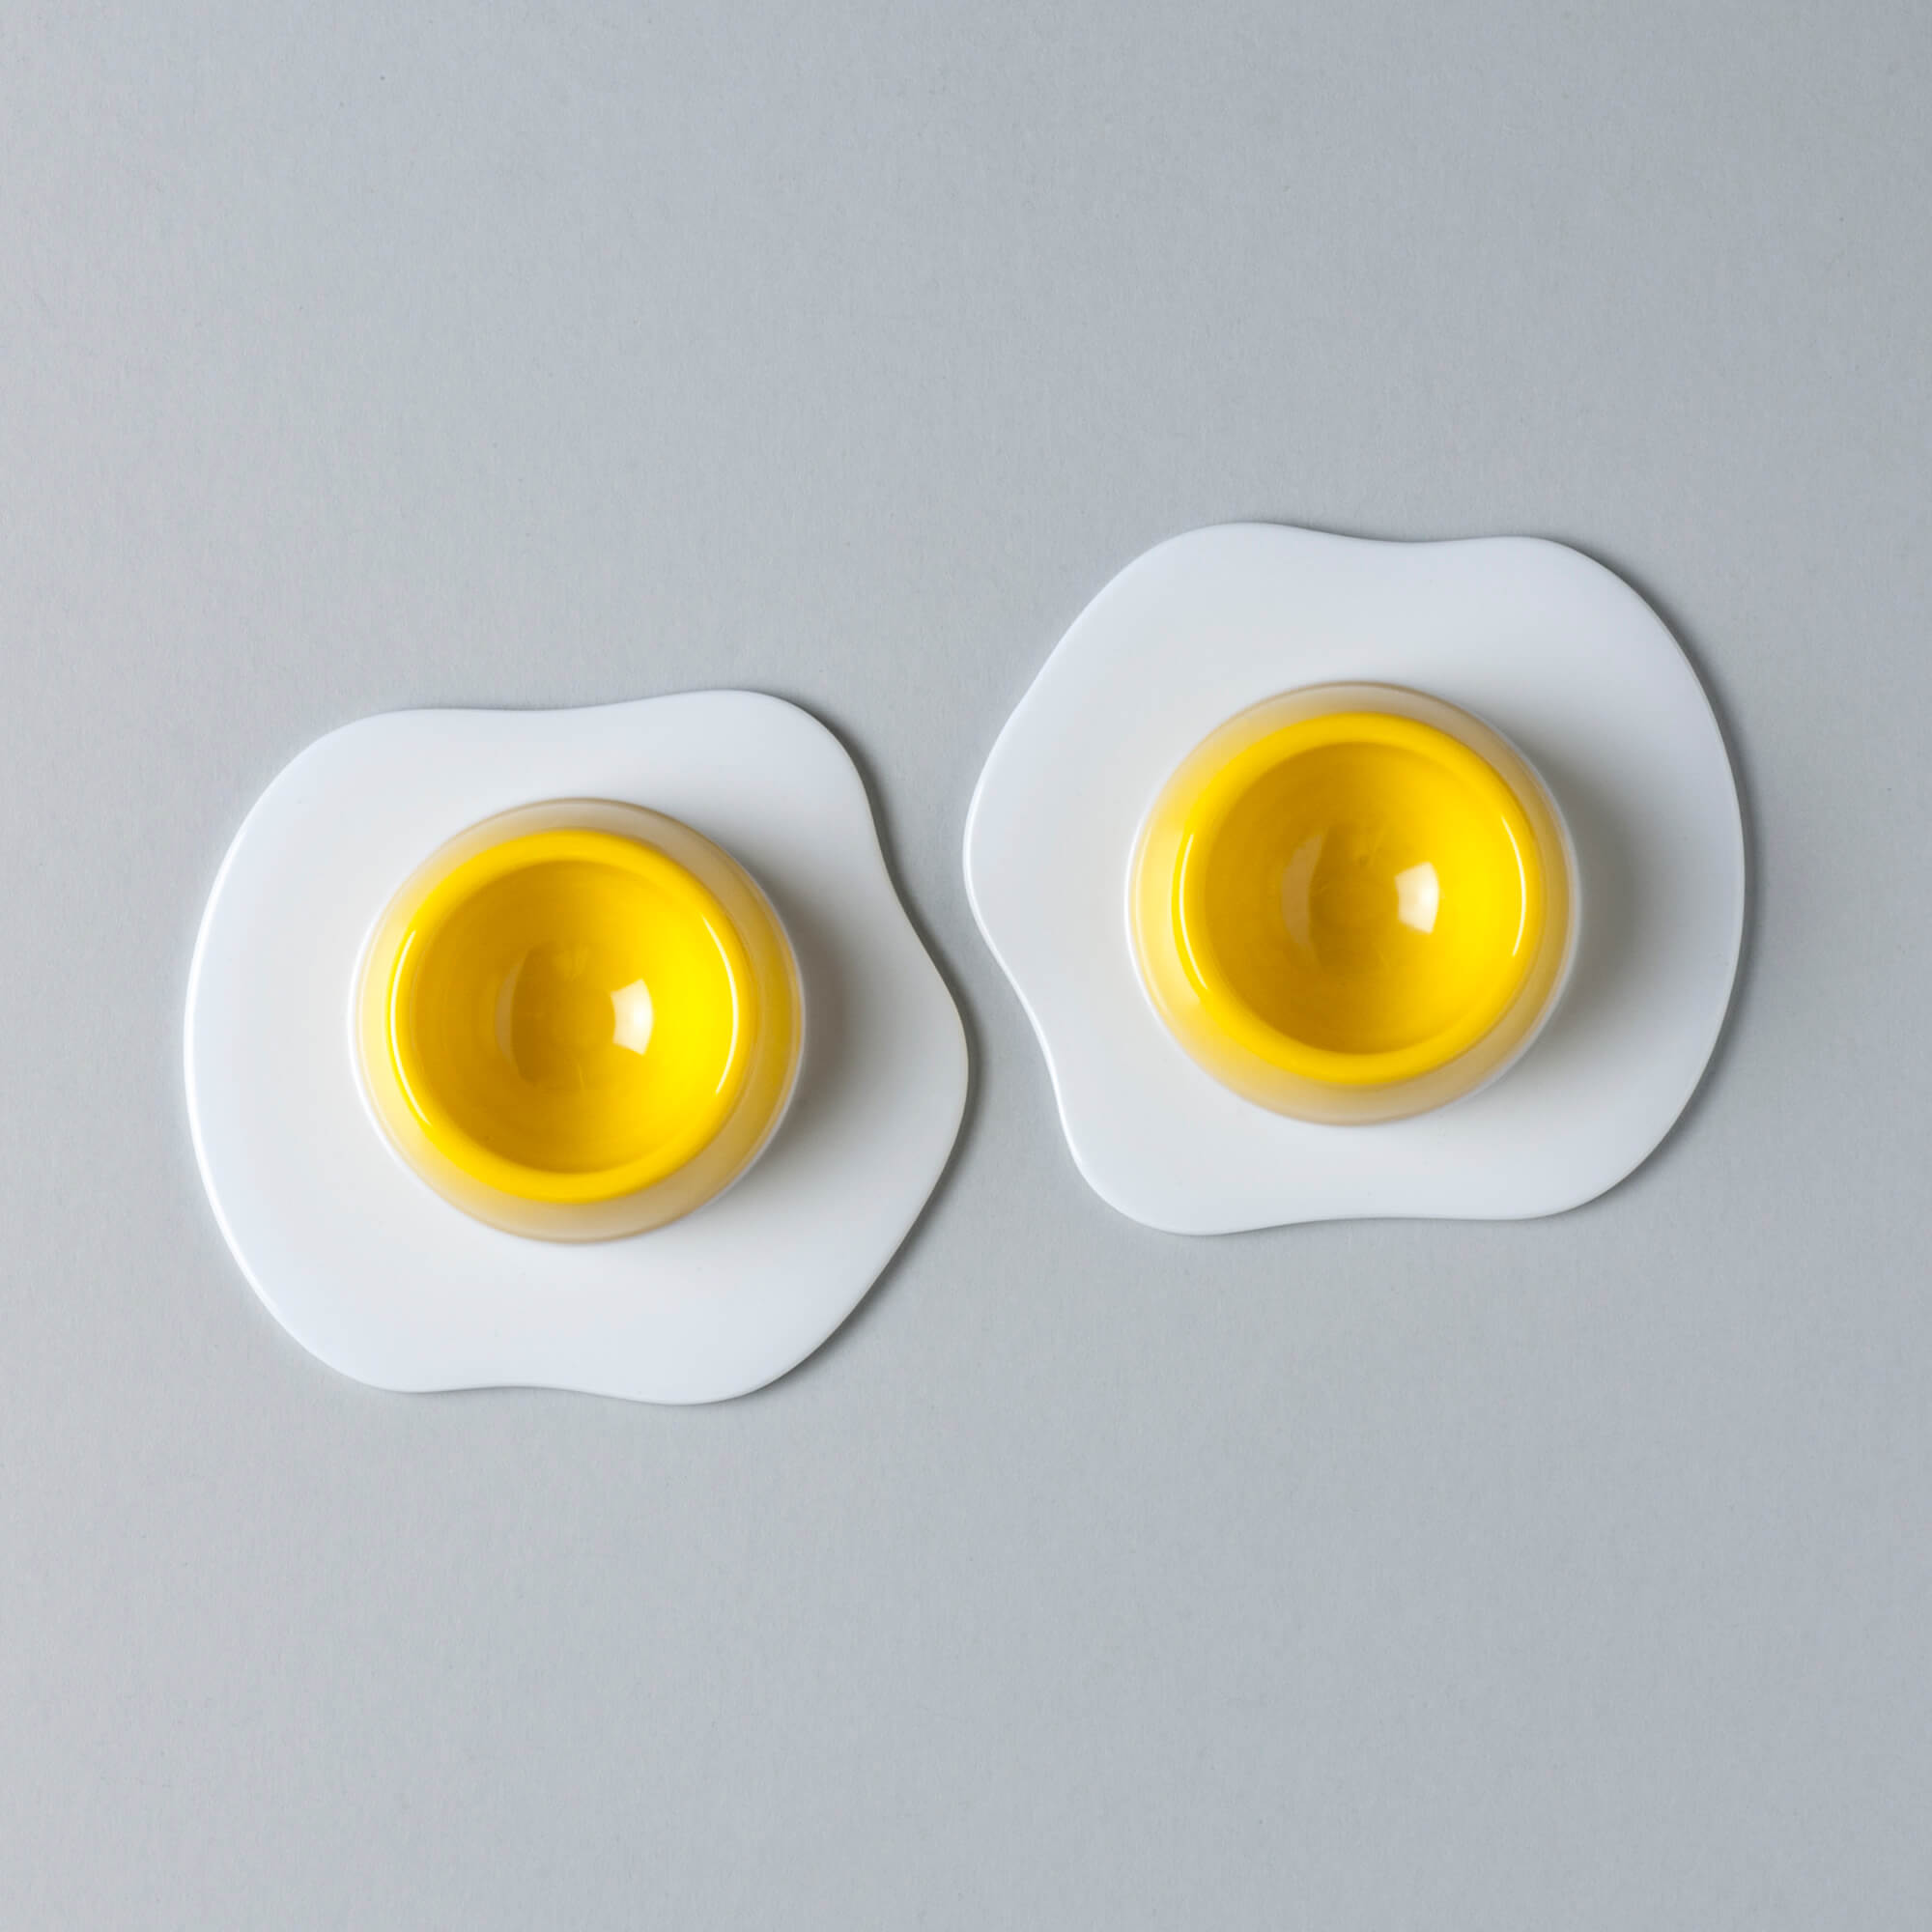 Top down of Set of 2 novelty Eggtastic Egg Cups